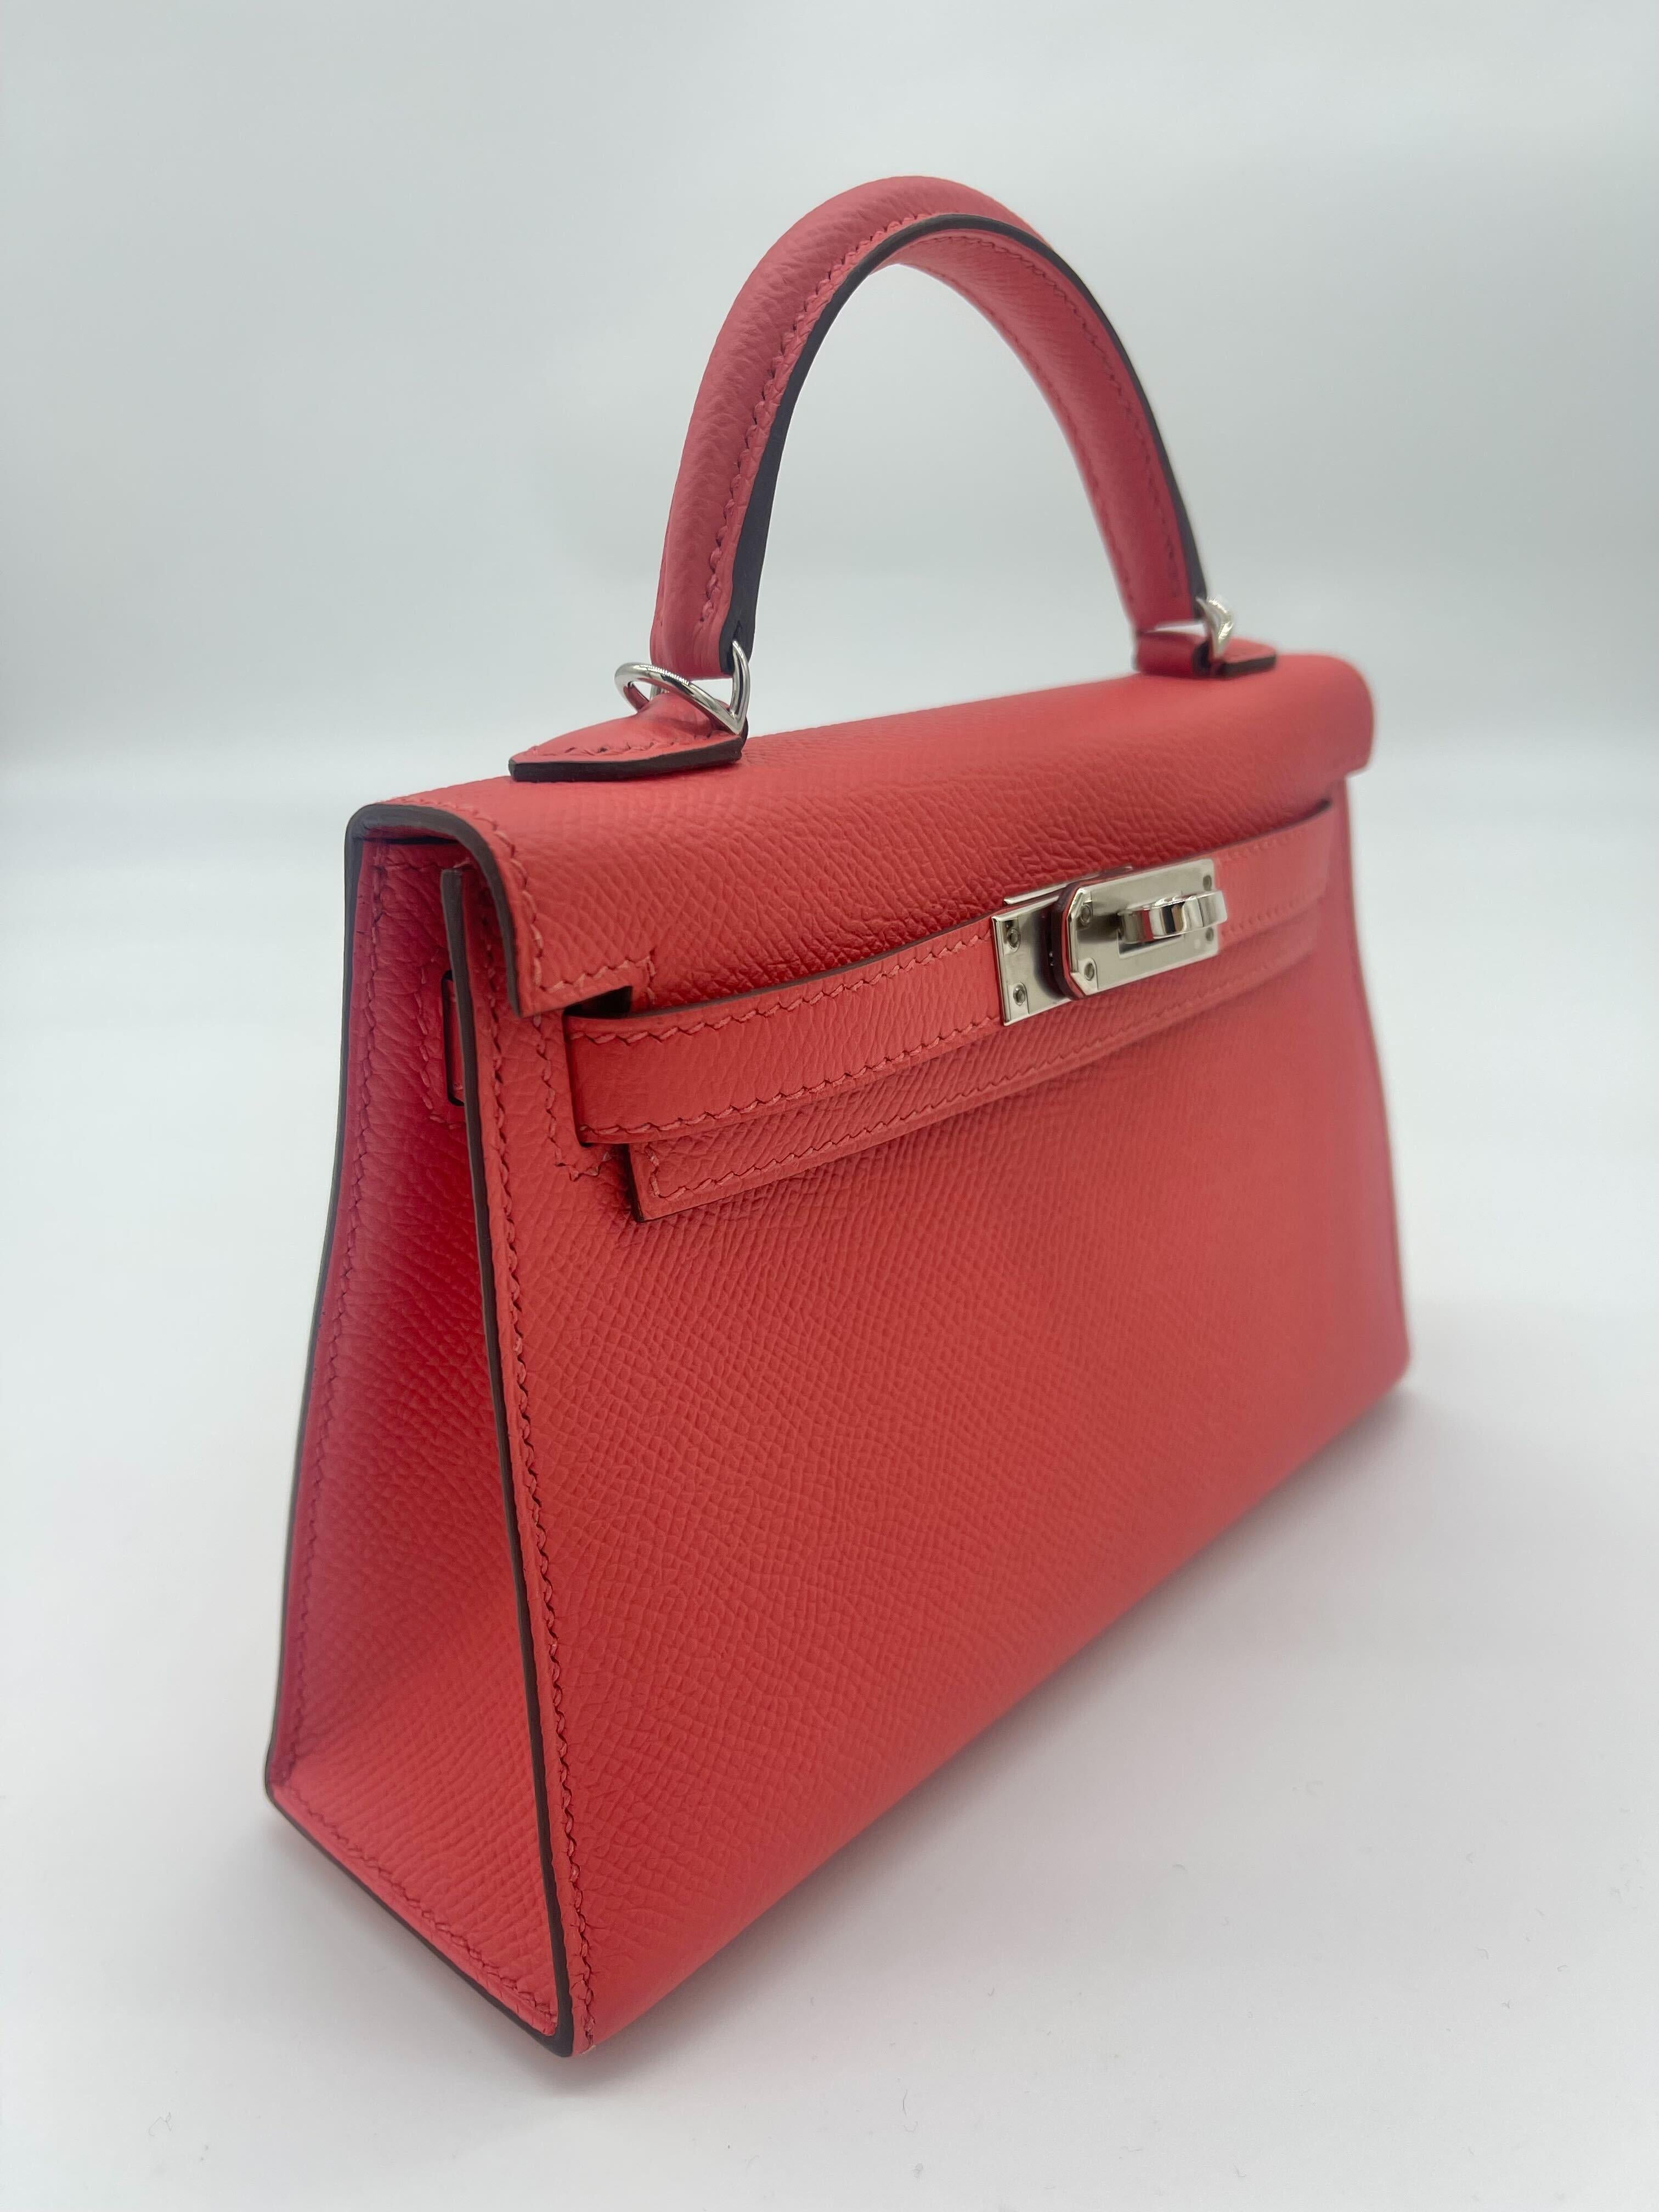 Hermes Kelly 20 Rose Jaipur Epsom Leather Palladium Hardware

Condition: Pre-owned (Like new)
Material: Epsom Leather
Measurements: 20cm x 16cm x 10cm
Hardware: Palladium

*Comes with full original packaging.
*Some plastic on hardware.
*Light